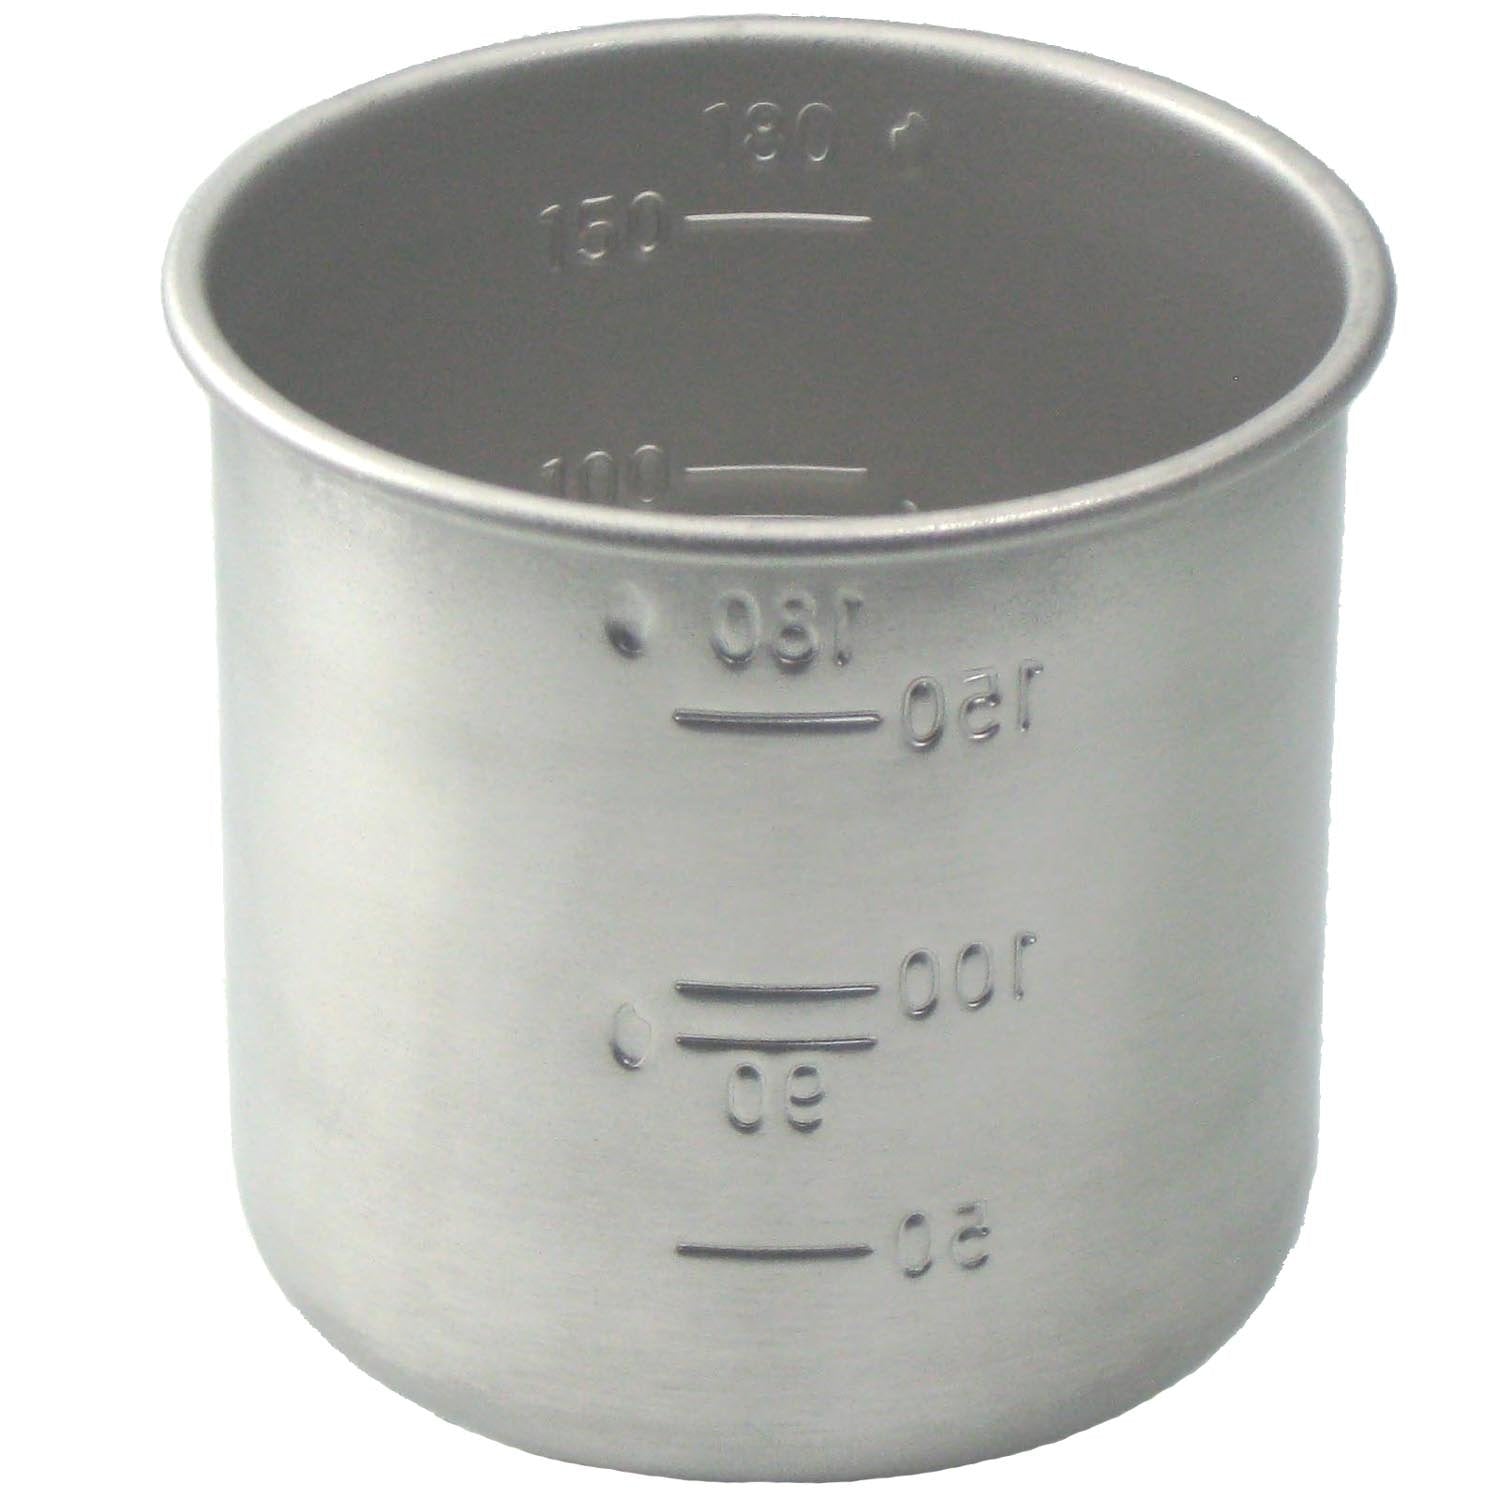 Idea Cough River for 18-8 Stainless Rice Measuring Cup 1 Go